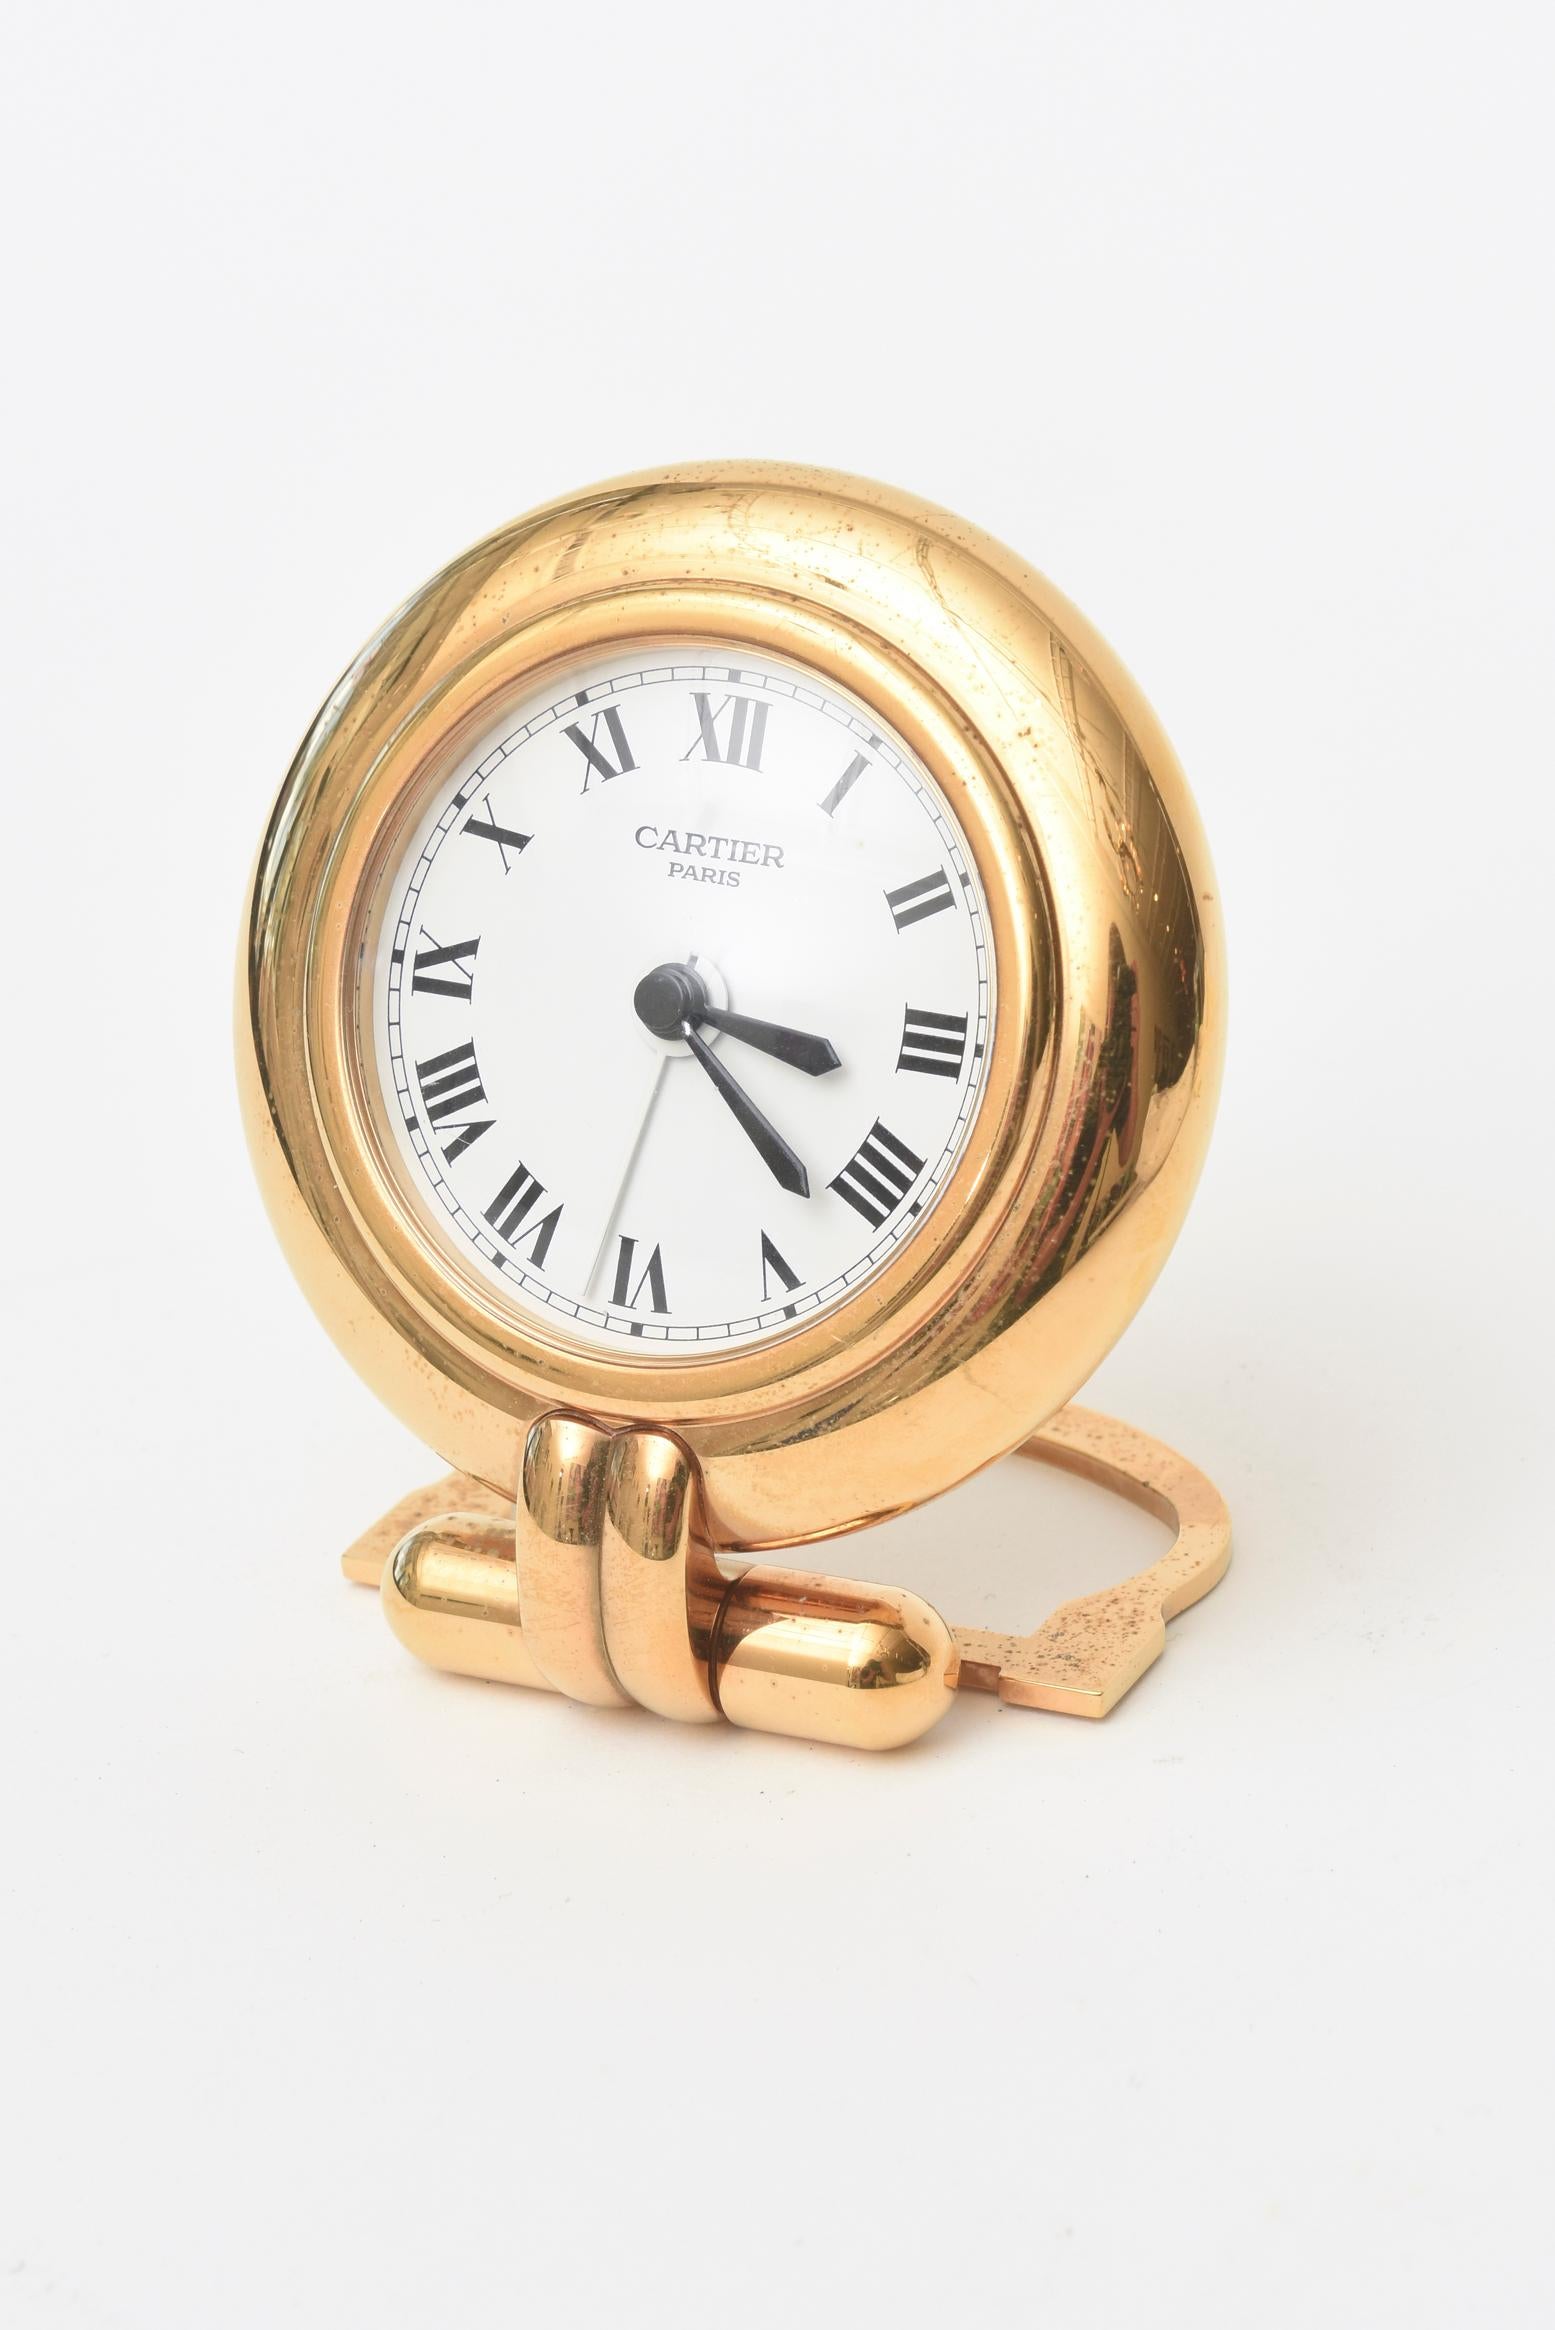 This regal hallmarked Cartier 24-karat gold-plated and lapis lazuli quartz travel or desk clock is no longer being made. It is from the 1990s. It was originally designed in the 1920s. It is marked Cartier made in France and numbered 0517789. The